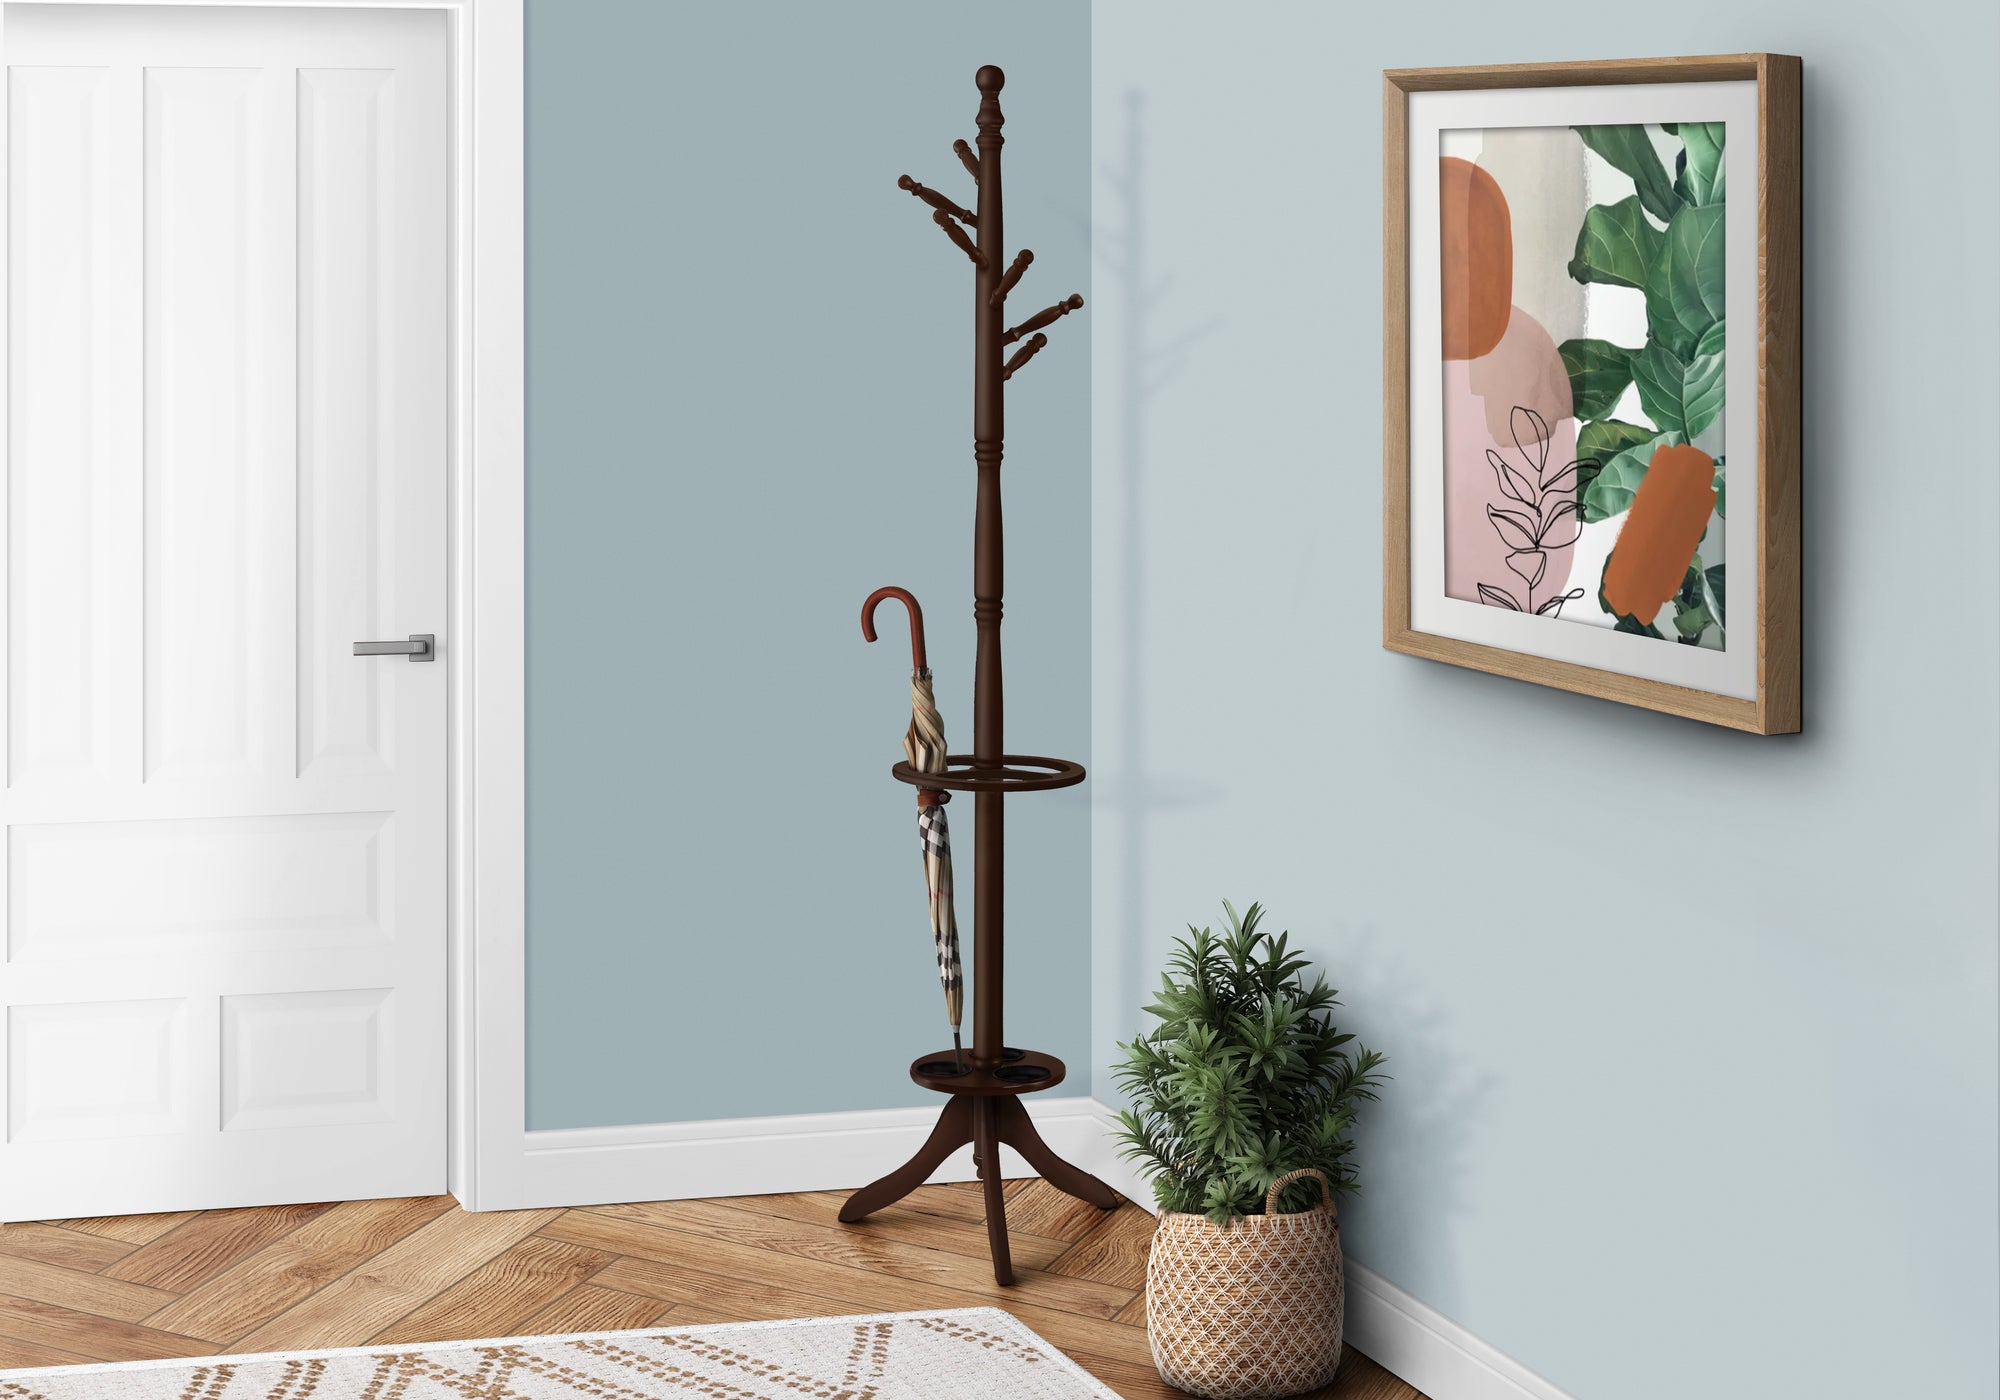 MN-482005    Coat Rack, Hall Tree, Free Standing, 6 Hooks, Entryway, 71"H, Umbrella Holder, Wooden, Cherry, Traditional